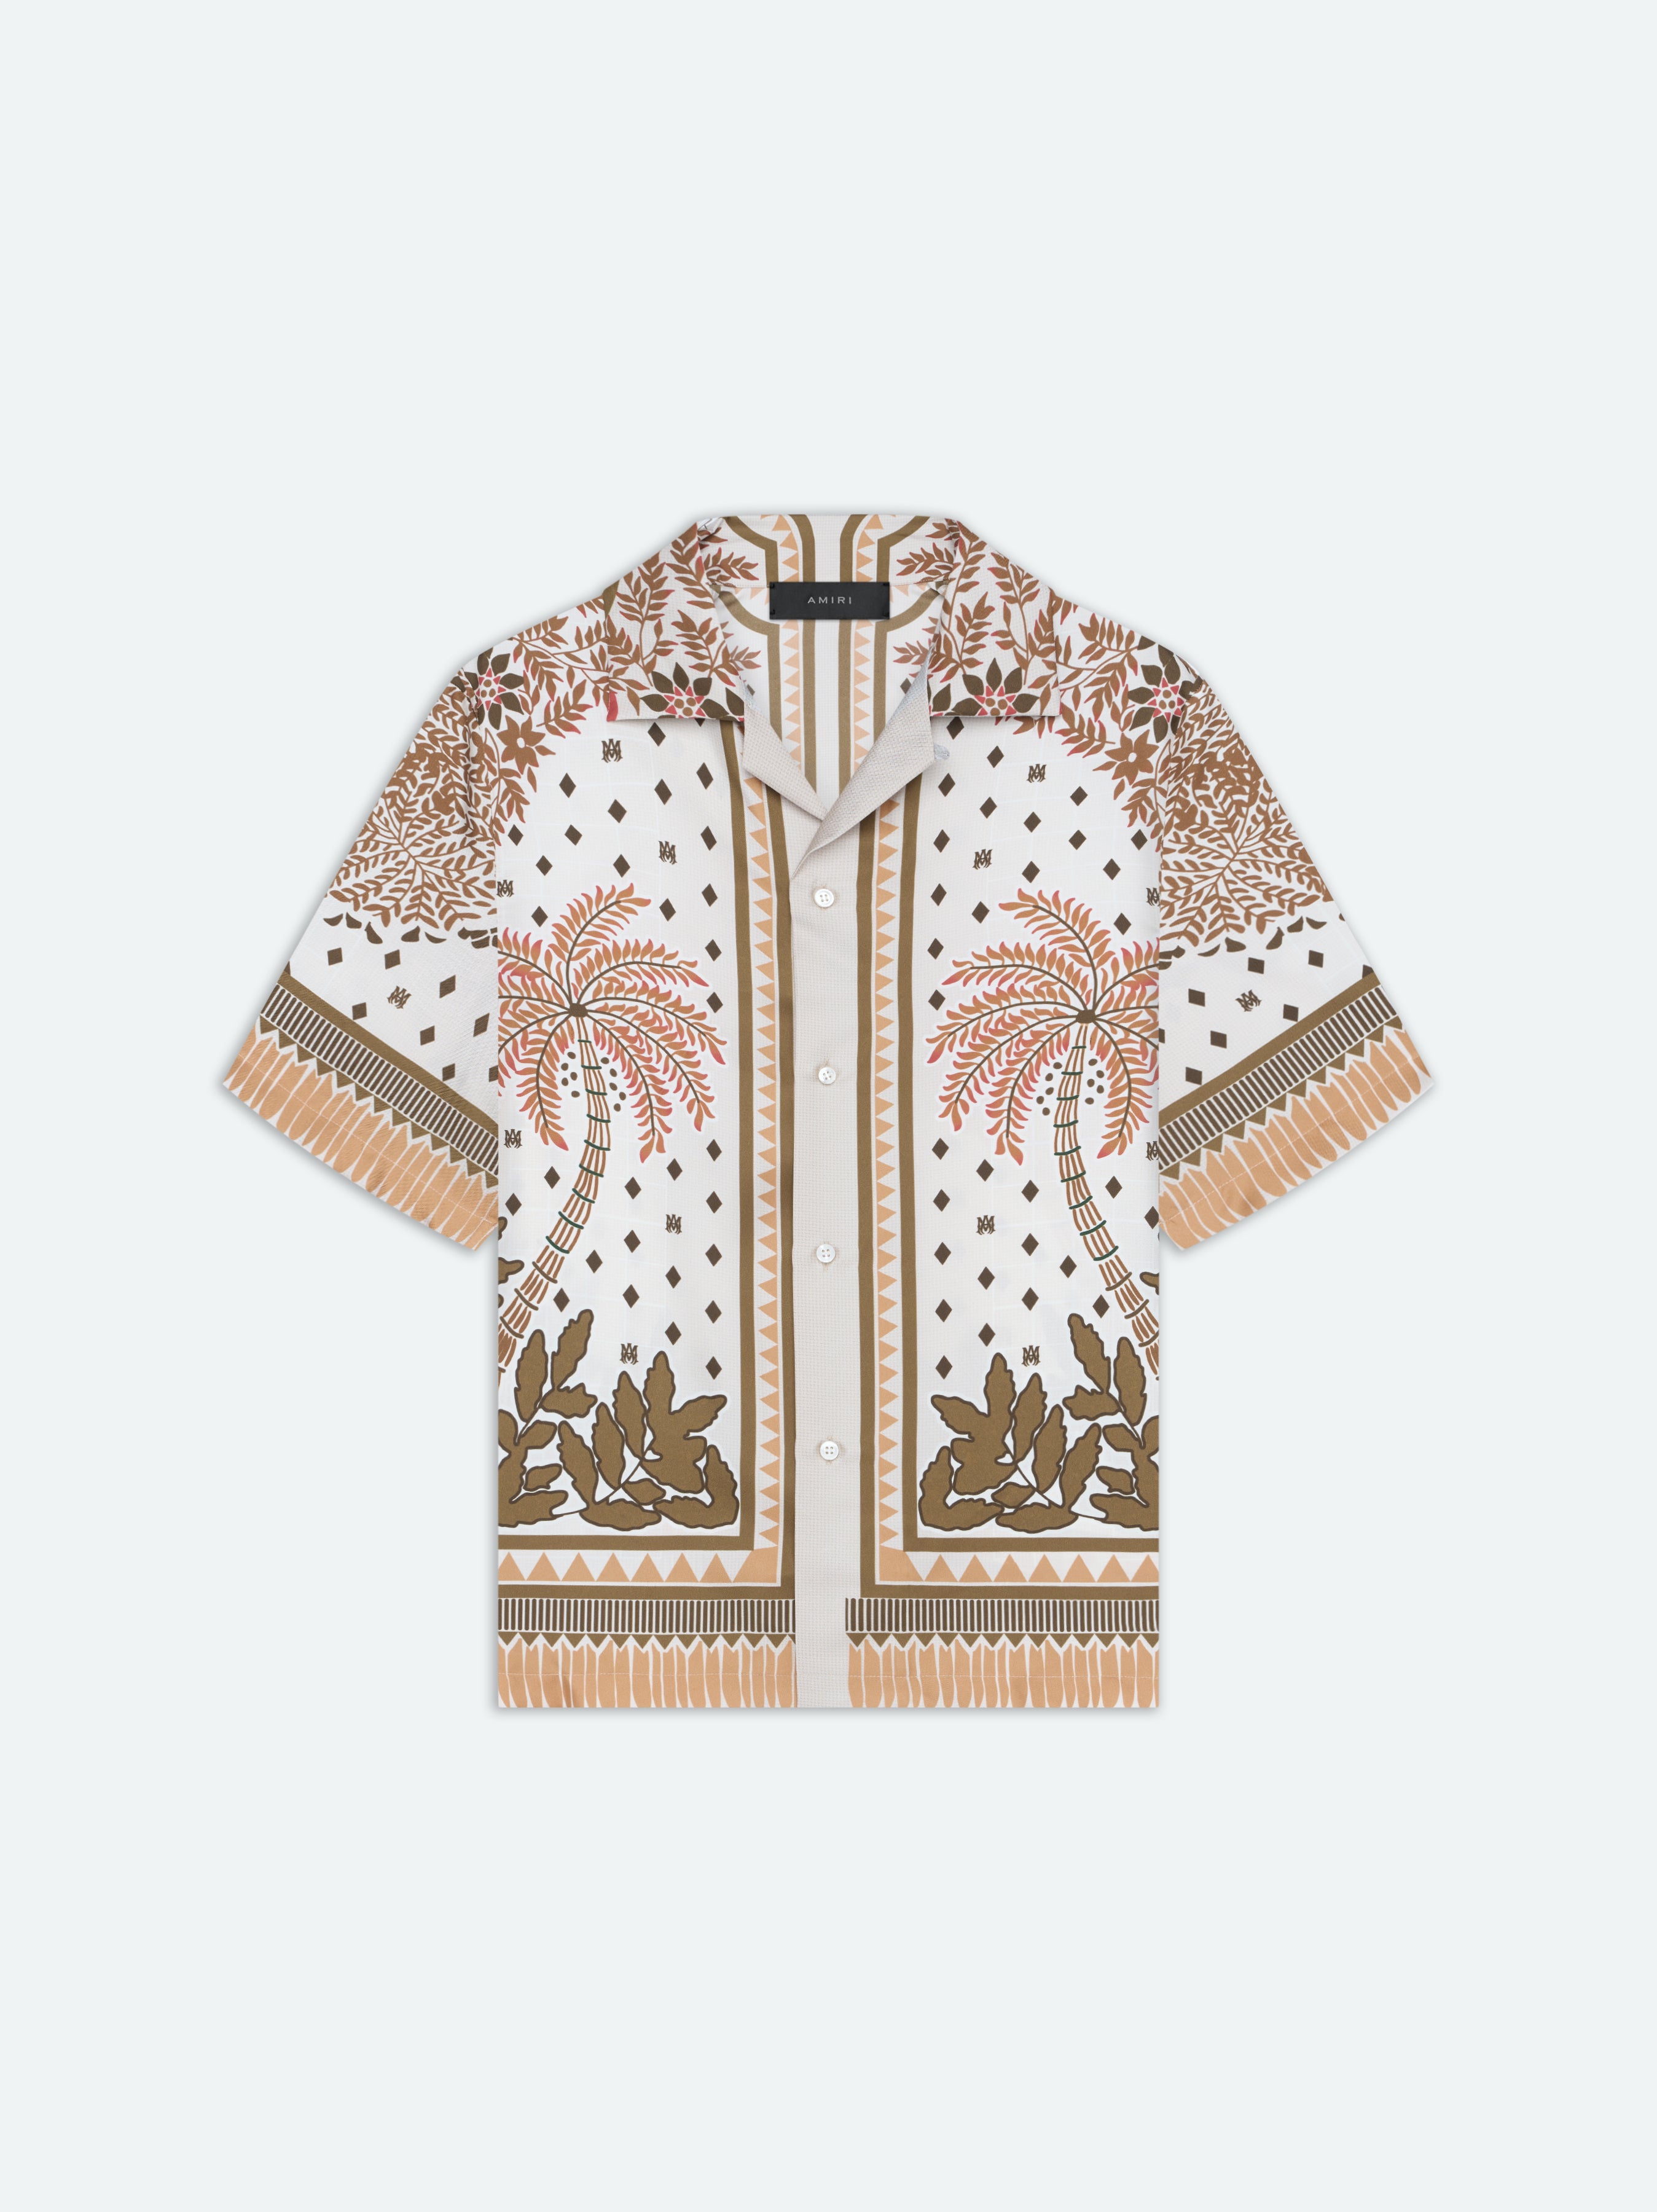 Product PALM TREE BOWLING SHIRT - Copper Brown featured image